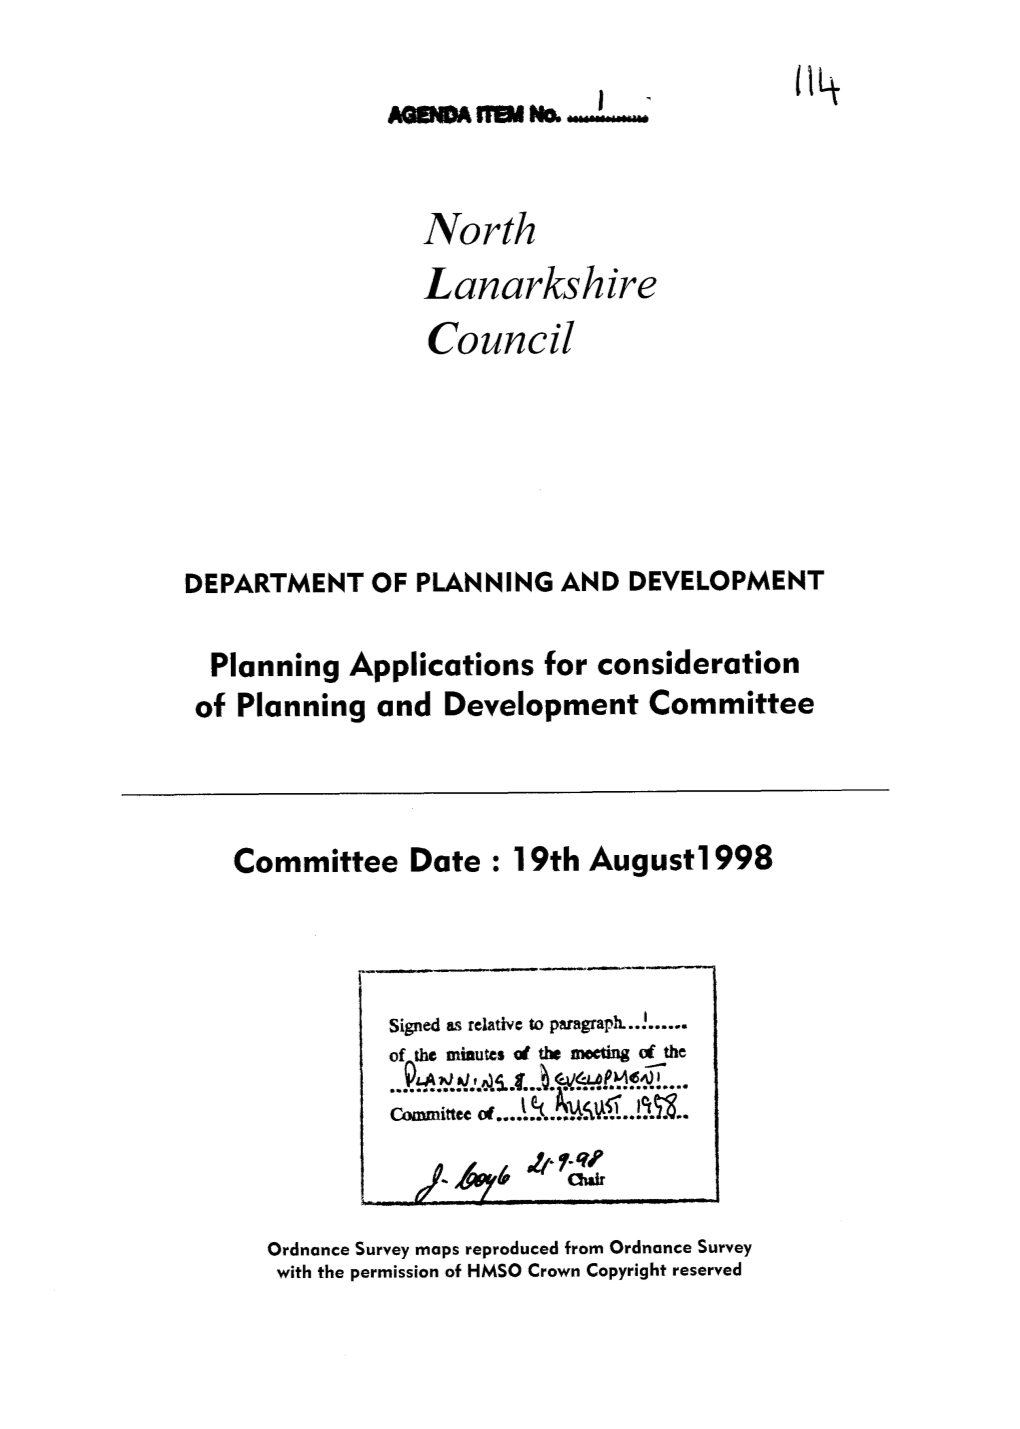 Department of Planning and Development